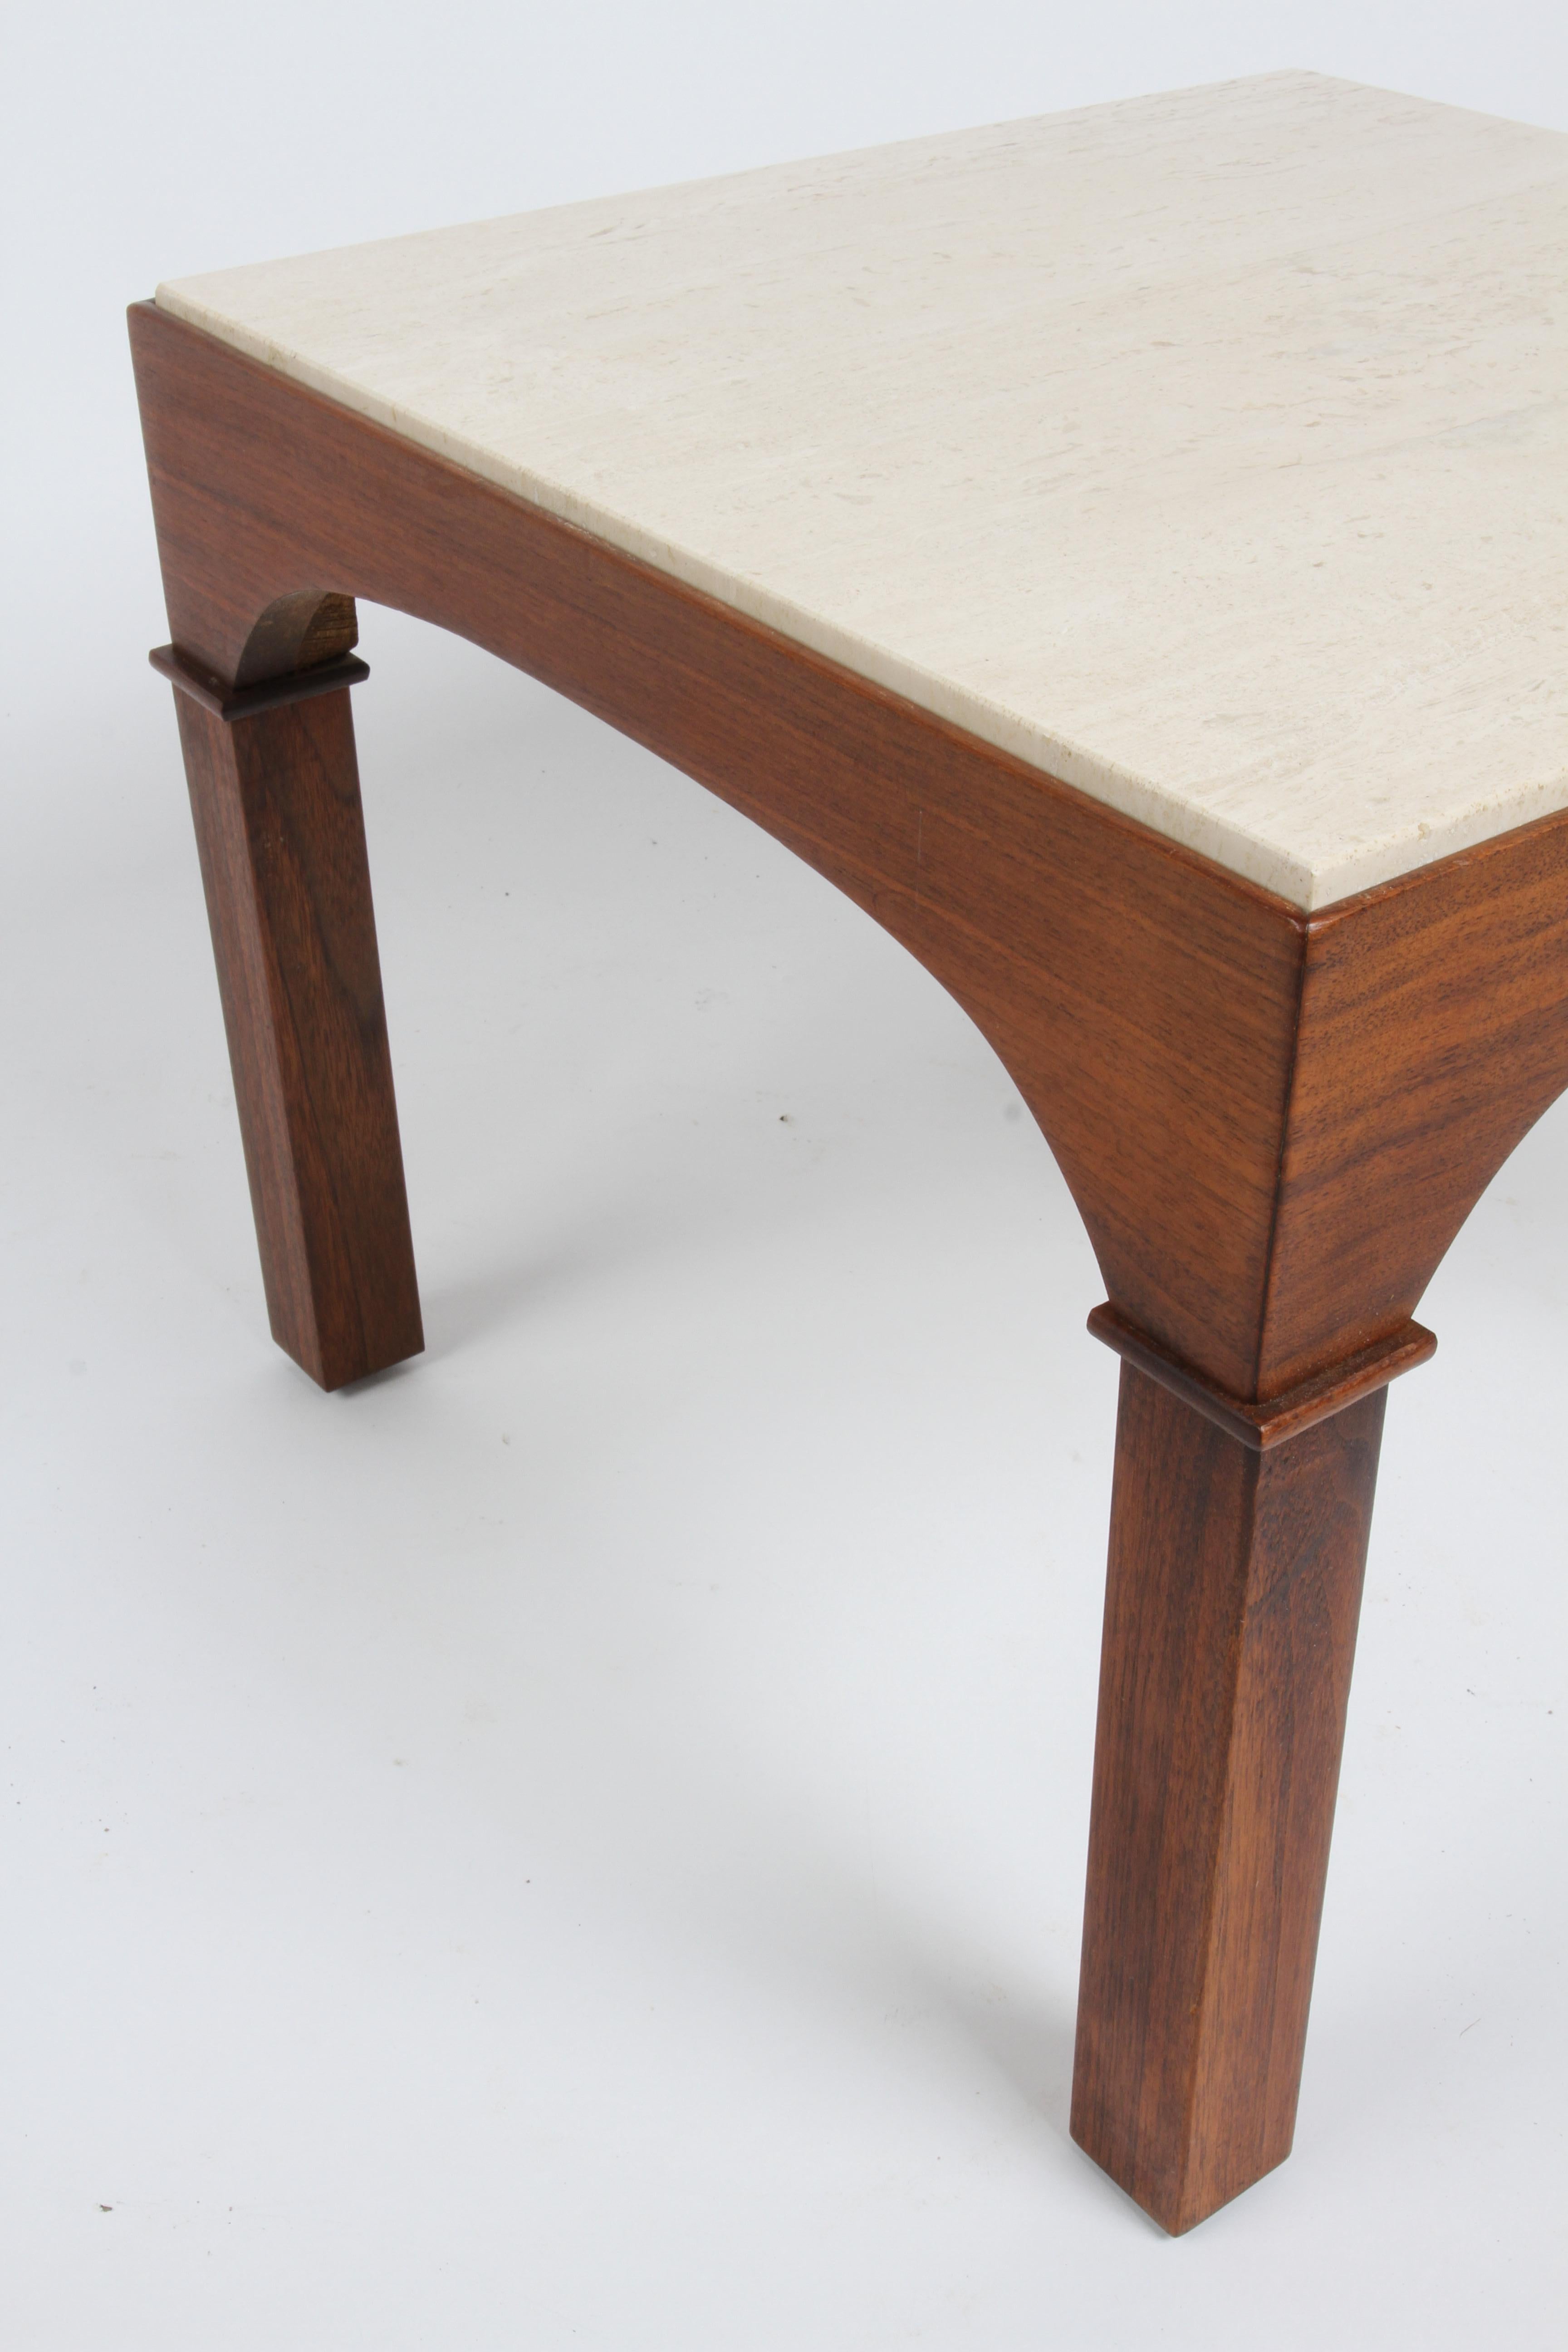 MCM John Keal for Brown Saltman Mahogany Occasional Tables with Travertine Tops  For Sale 5